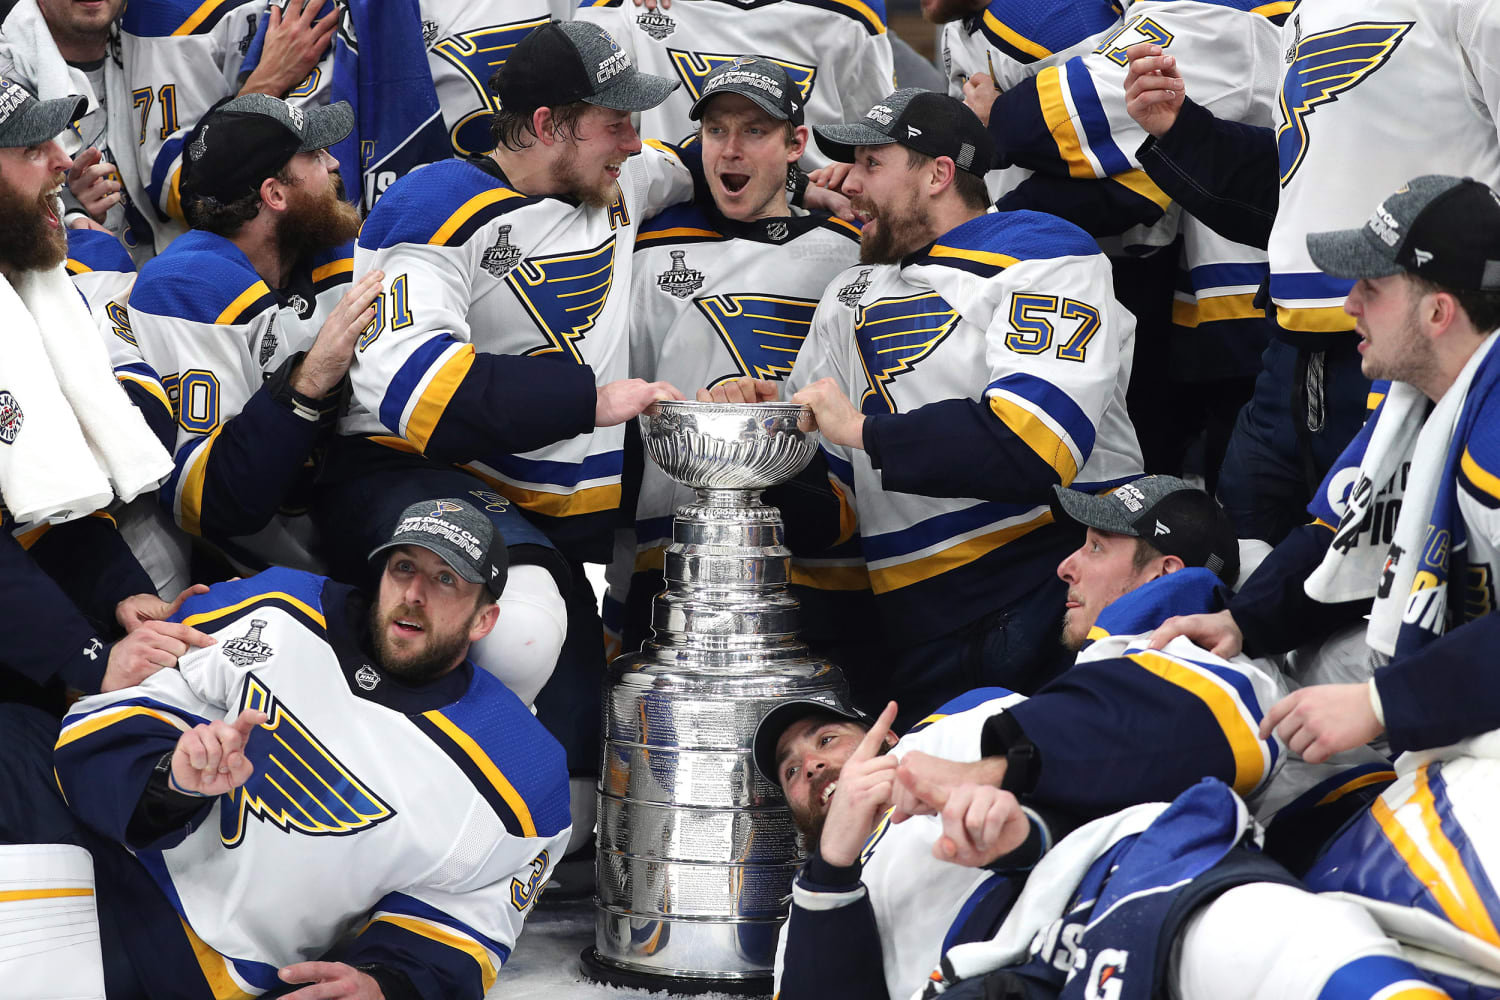 Women's St. Louis Blues - Stanley Cup Champions Bejeweled Top